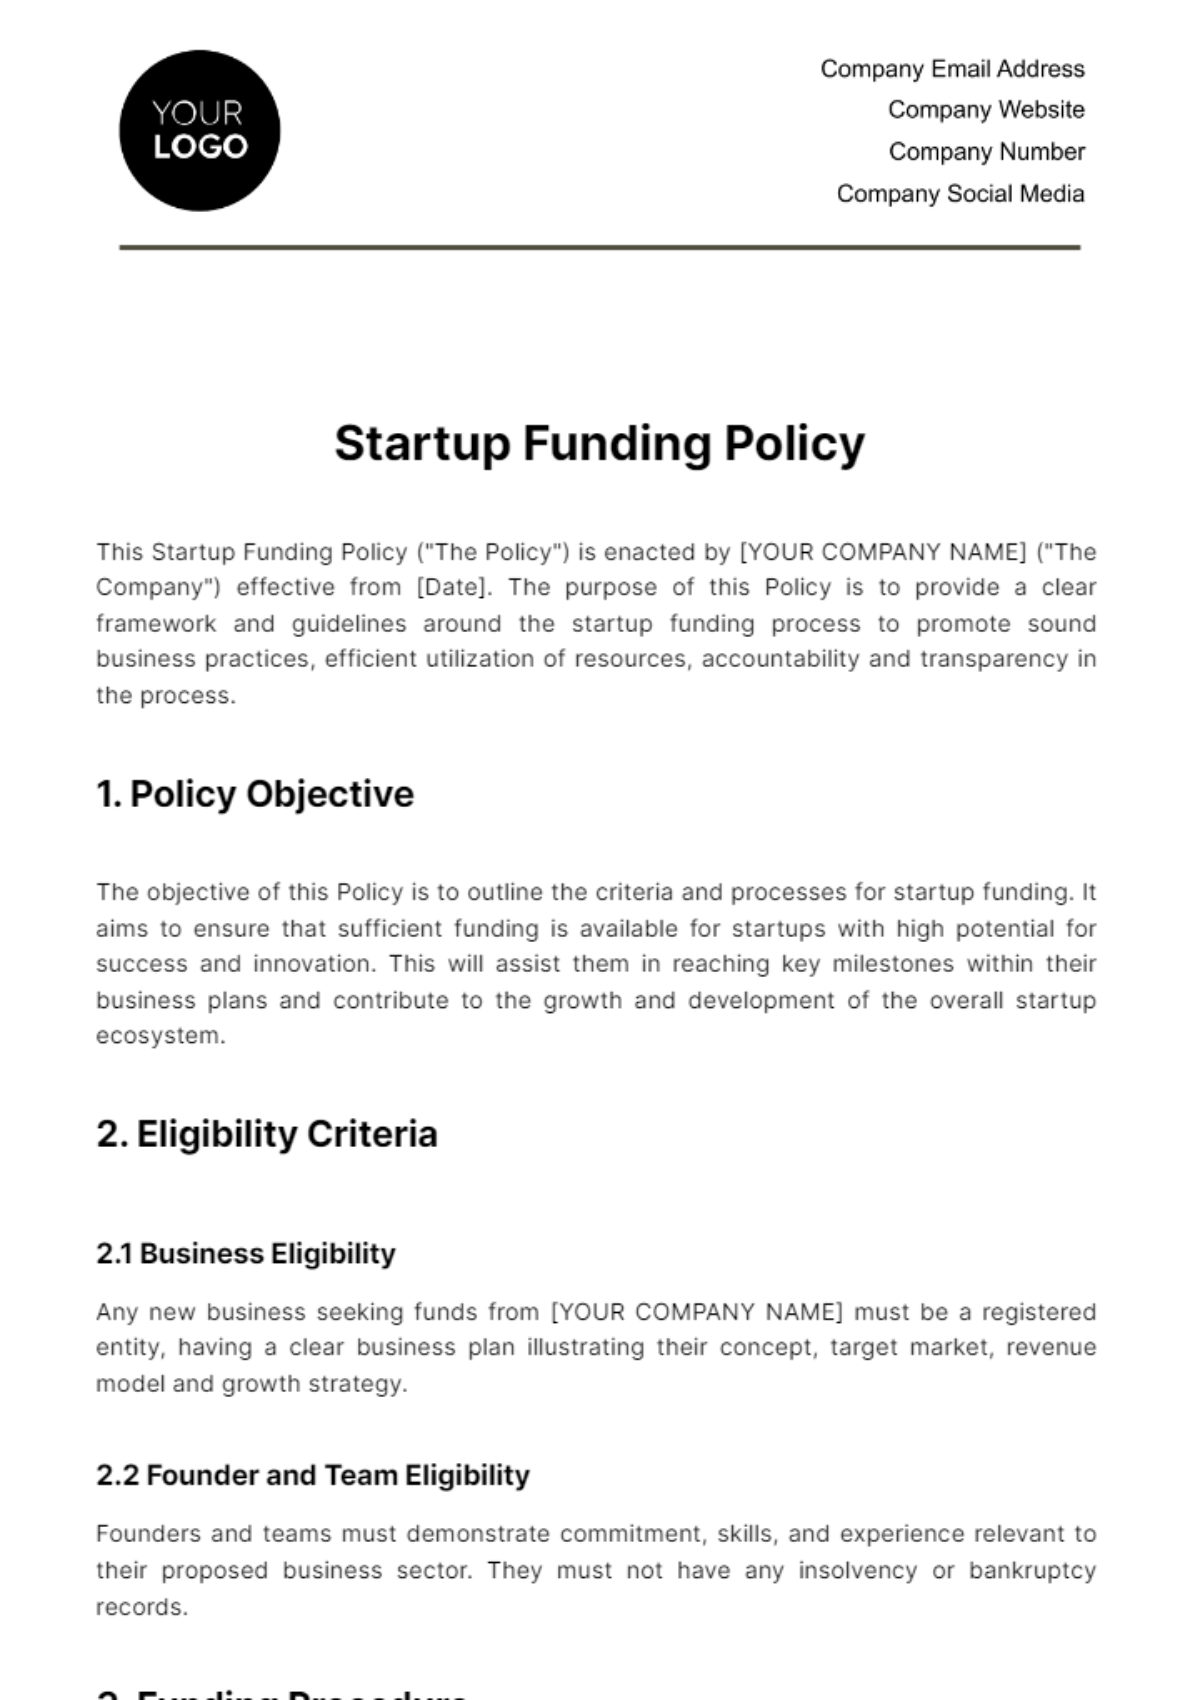 Free Startup Funding Policy Template